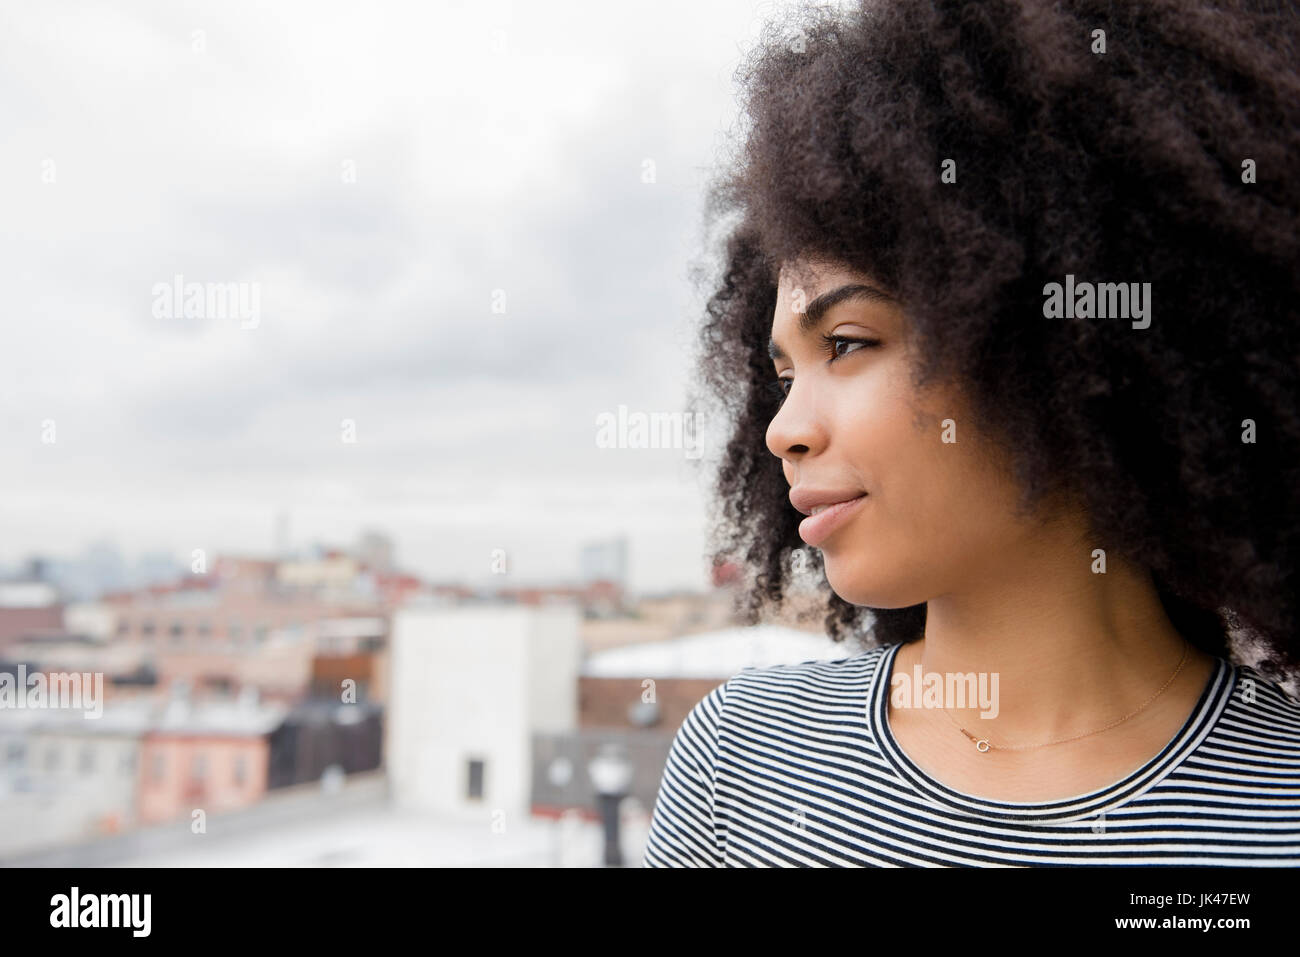 African American Woman smiling on rooftop Banque D'Images